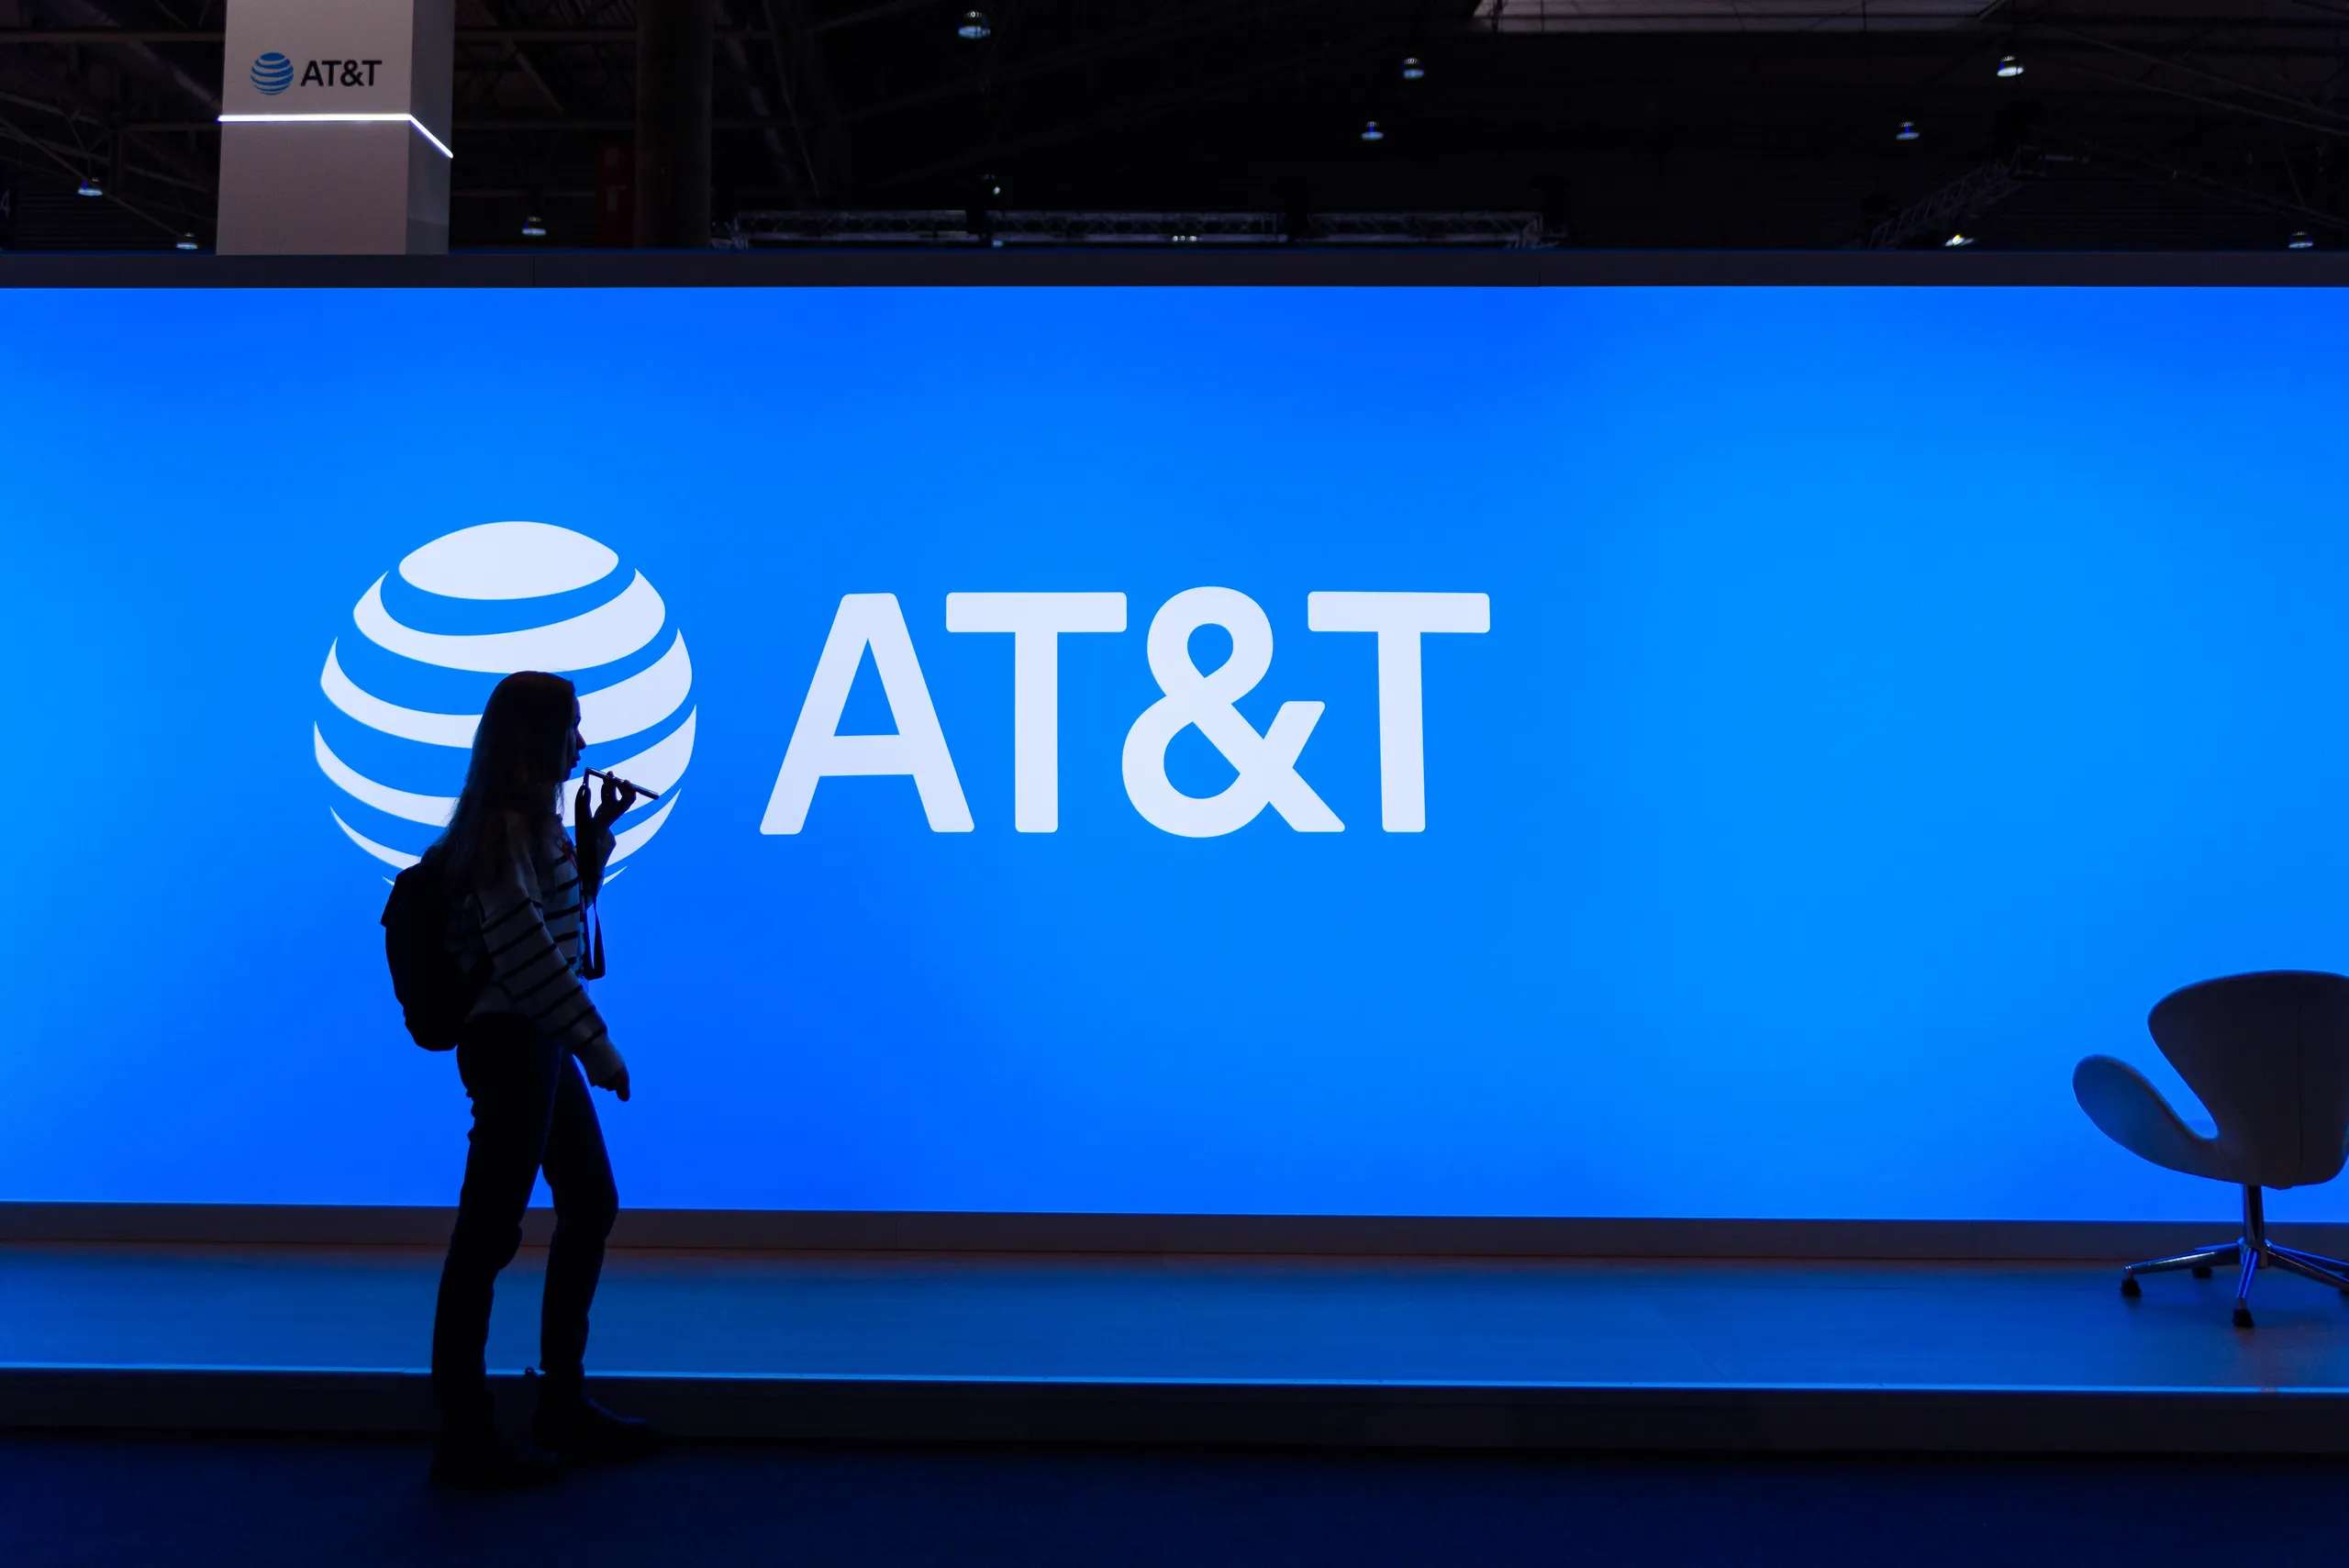 The Nationwide AT&T Outage and Its Swift Resolution for 70,000 Customers